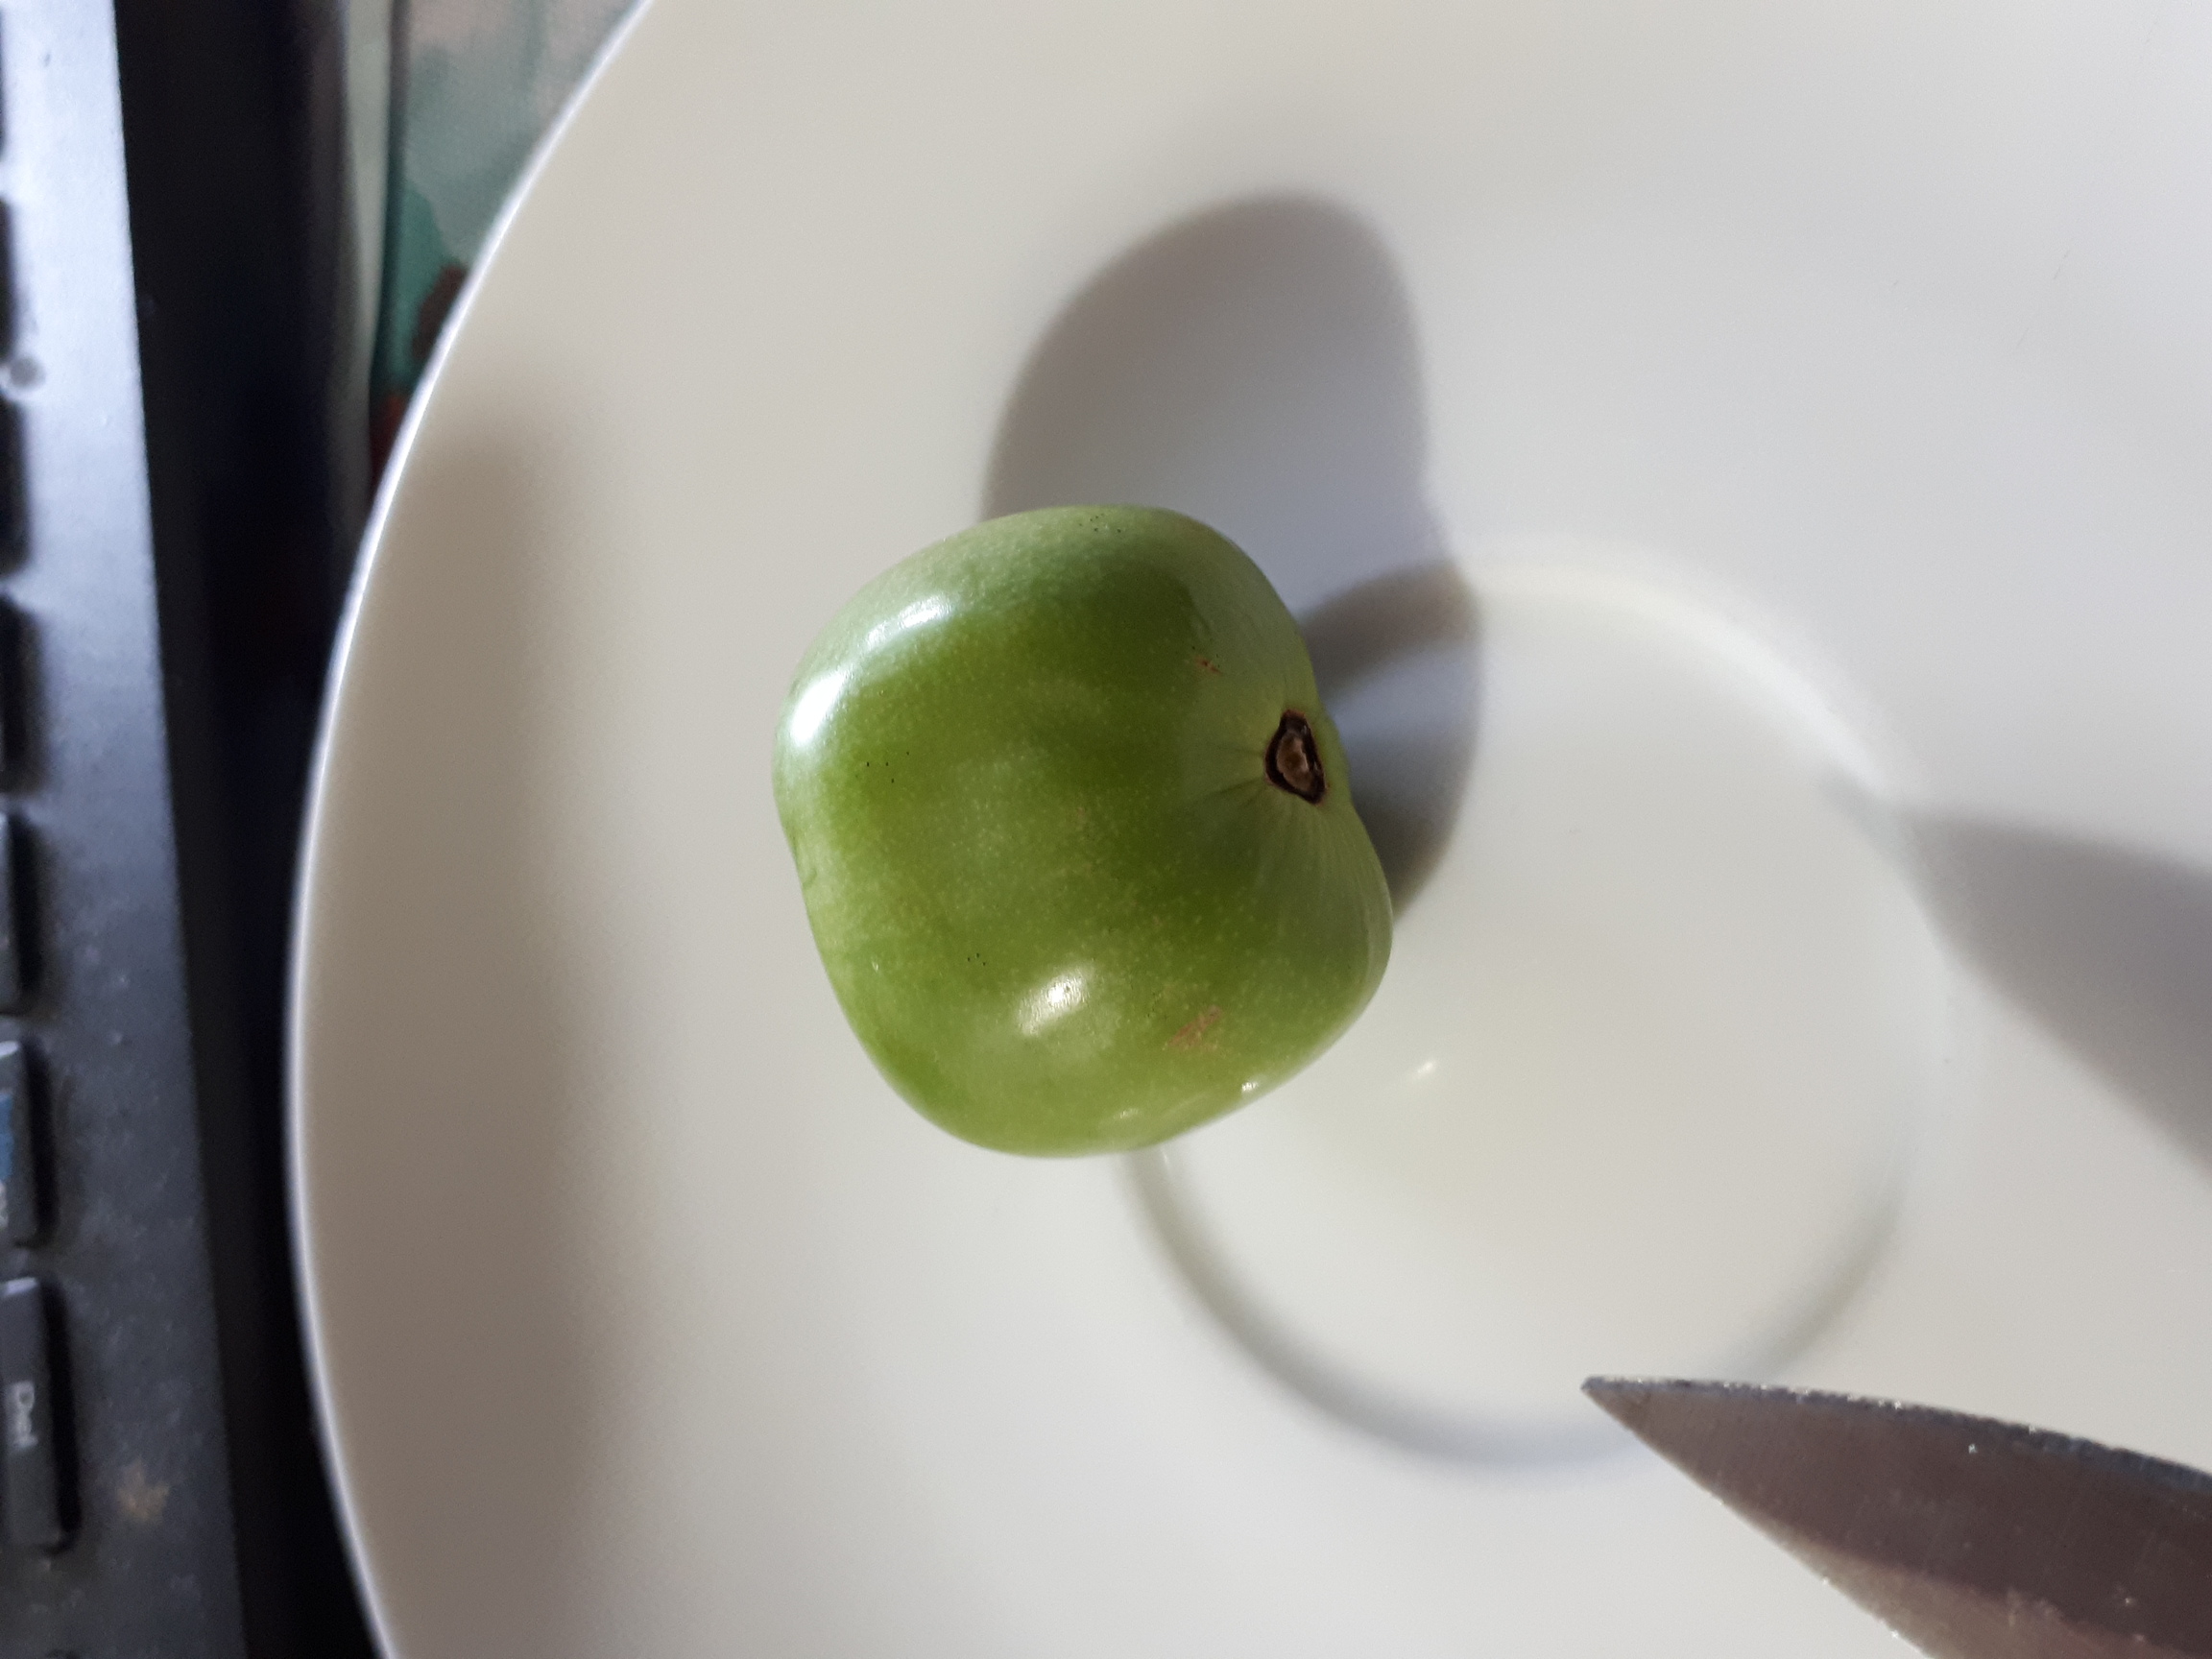 The fruit is the size of a cherry. Its skin is green.